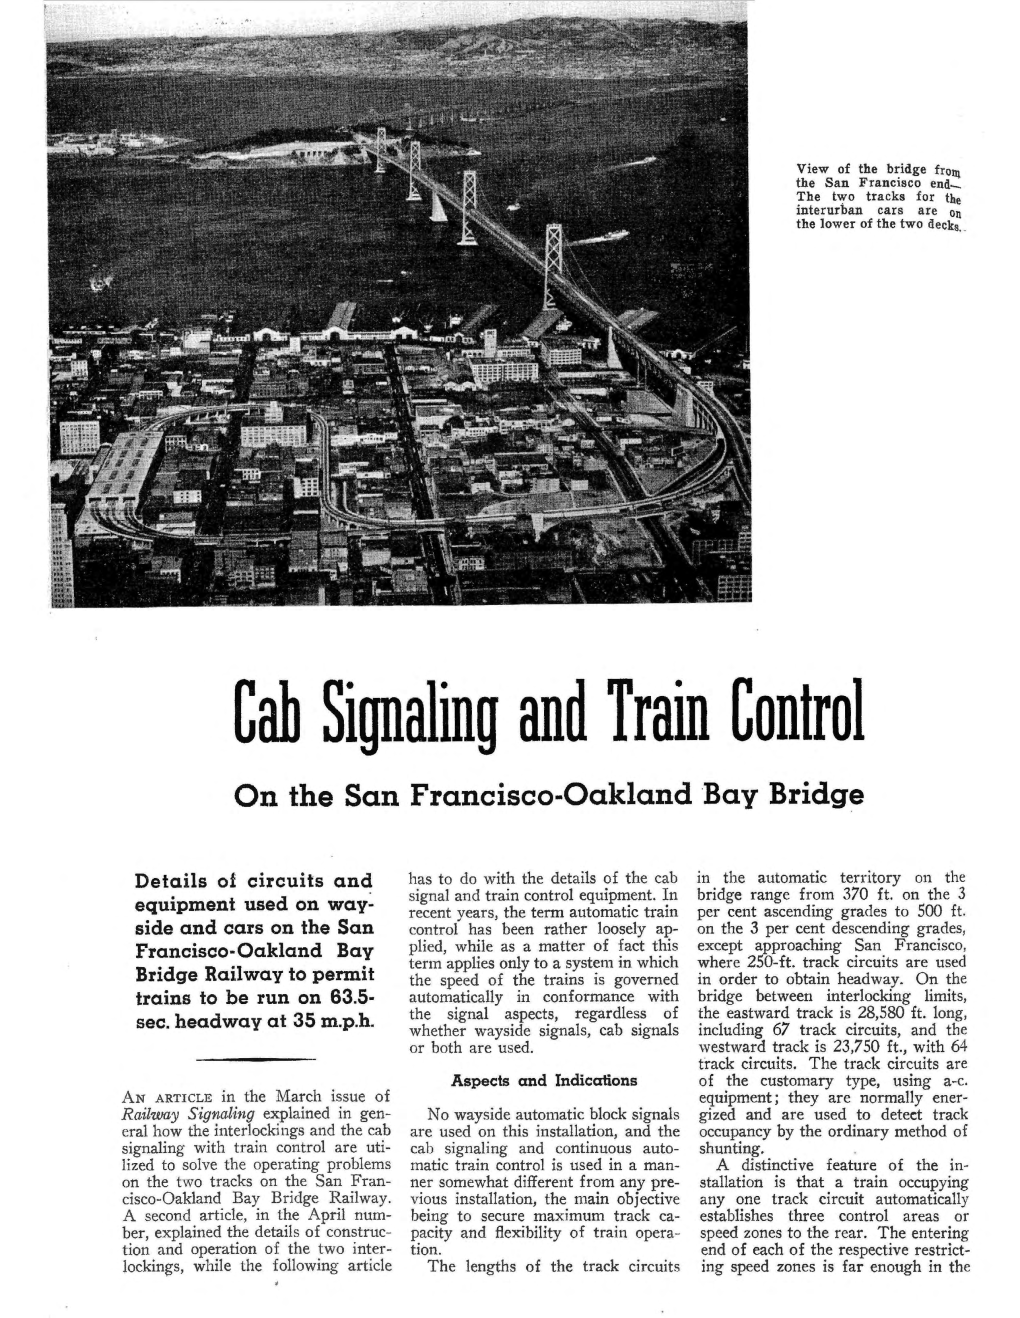 Cab Signaling and Train Control on the San Francisco-Oakland Bay